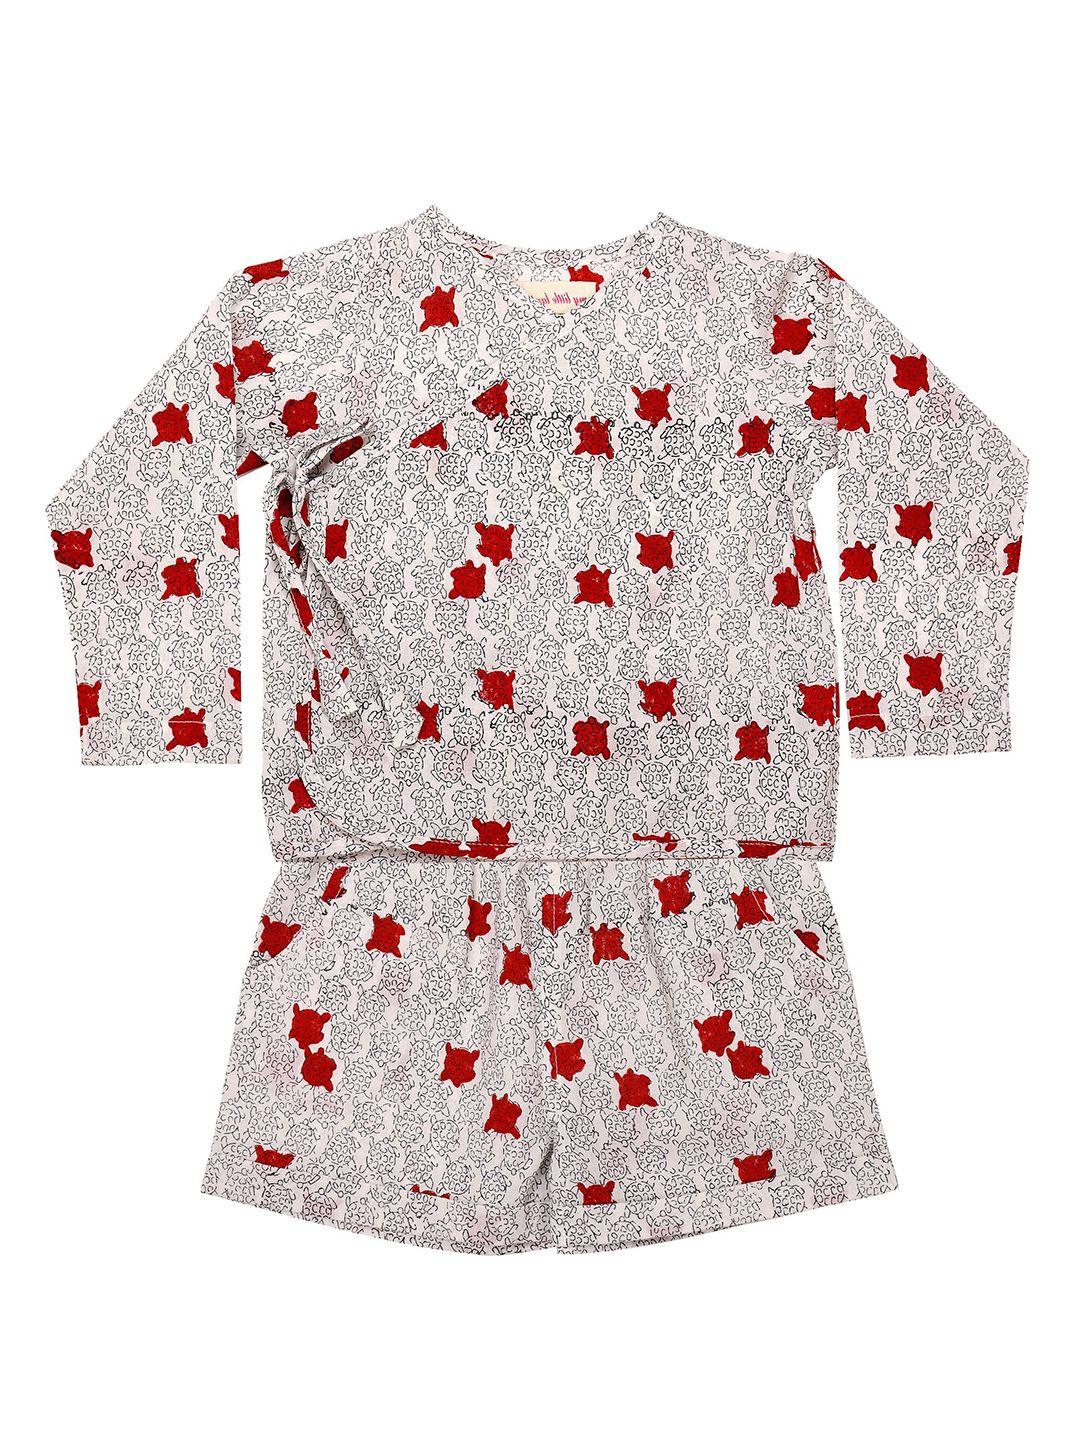 my little lambs unisex kids red & white printed top with shorts